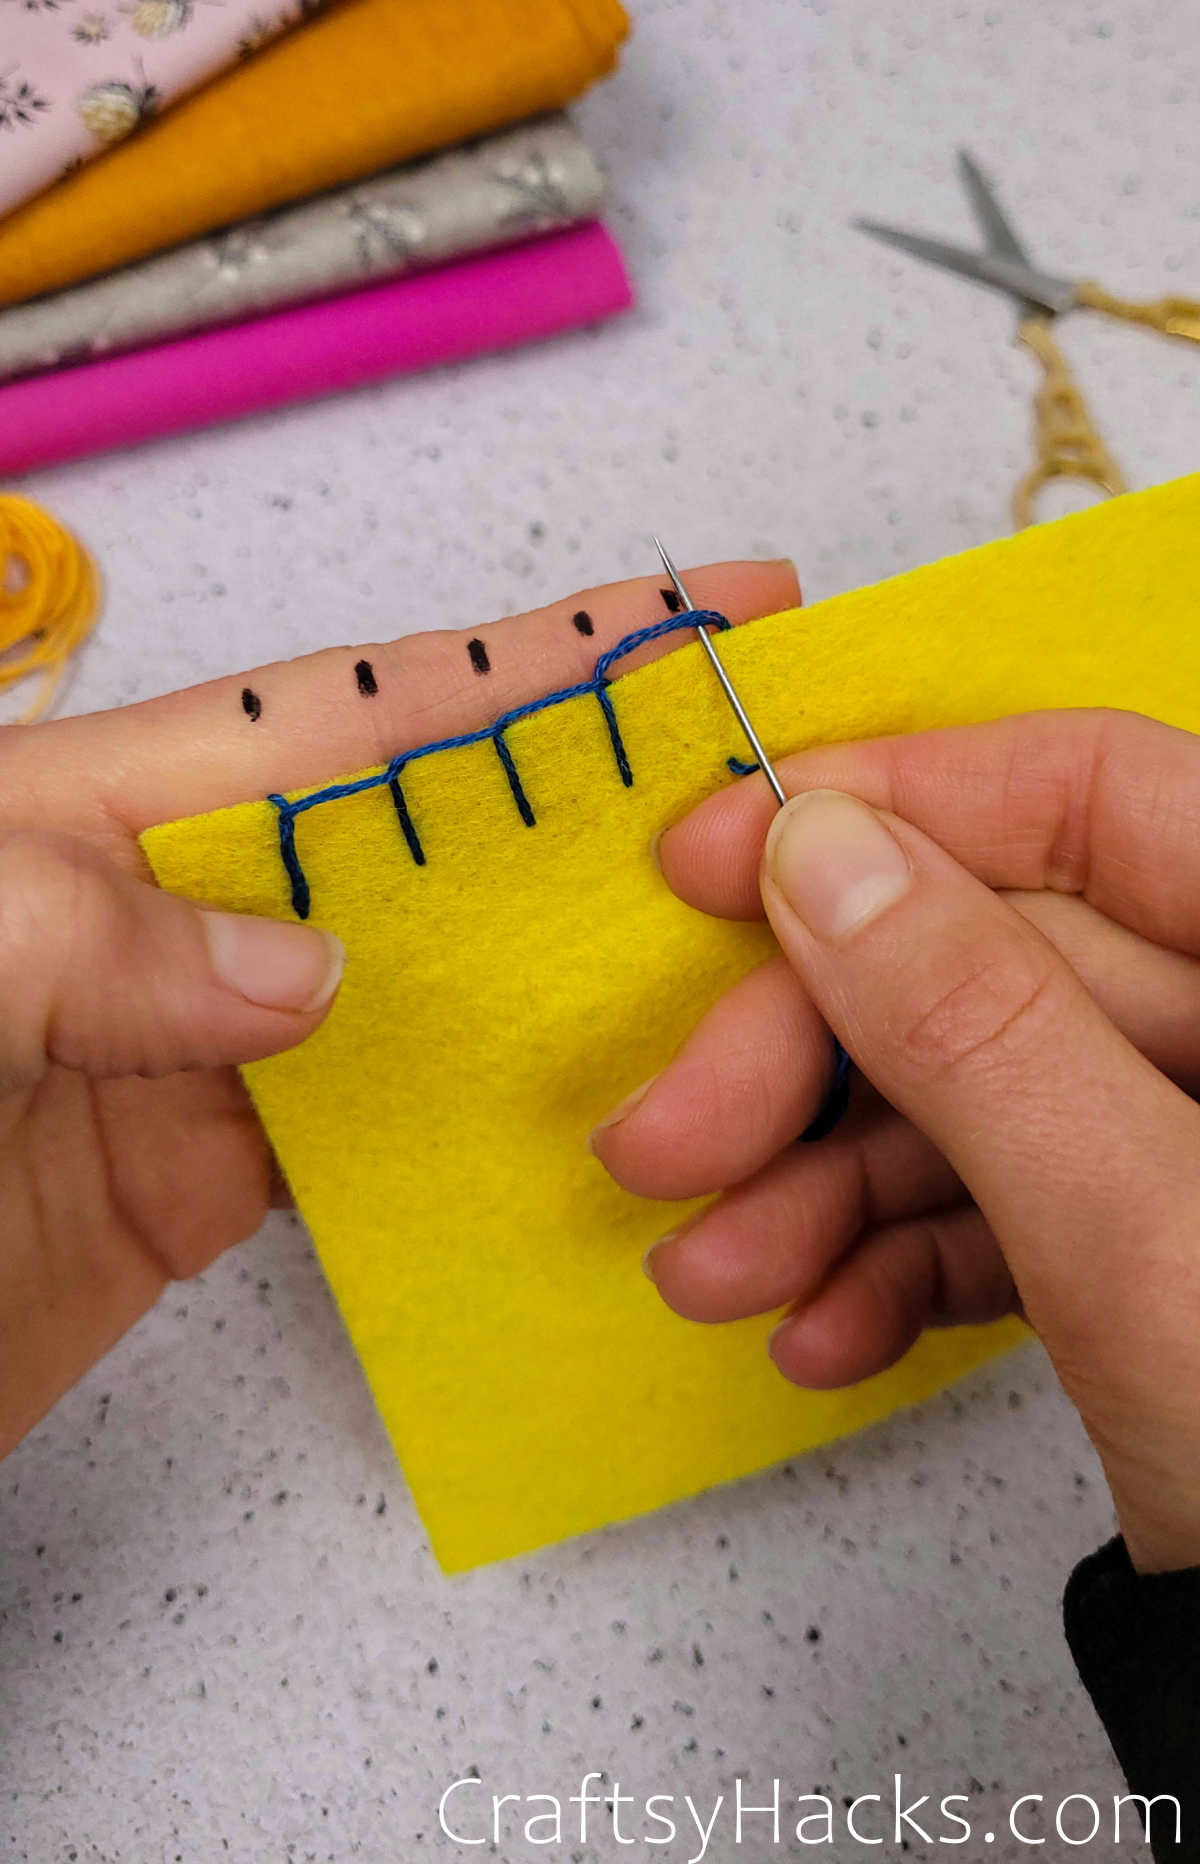 Sew with Finger as a Stitch Guide